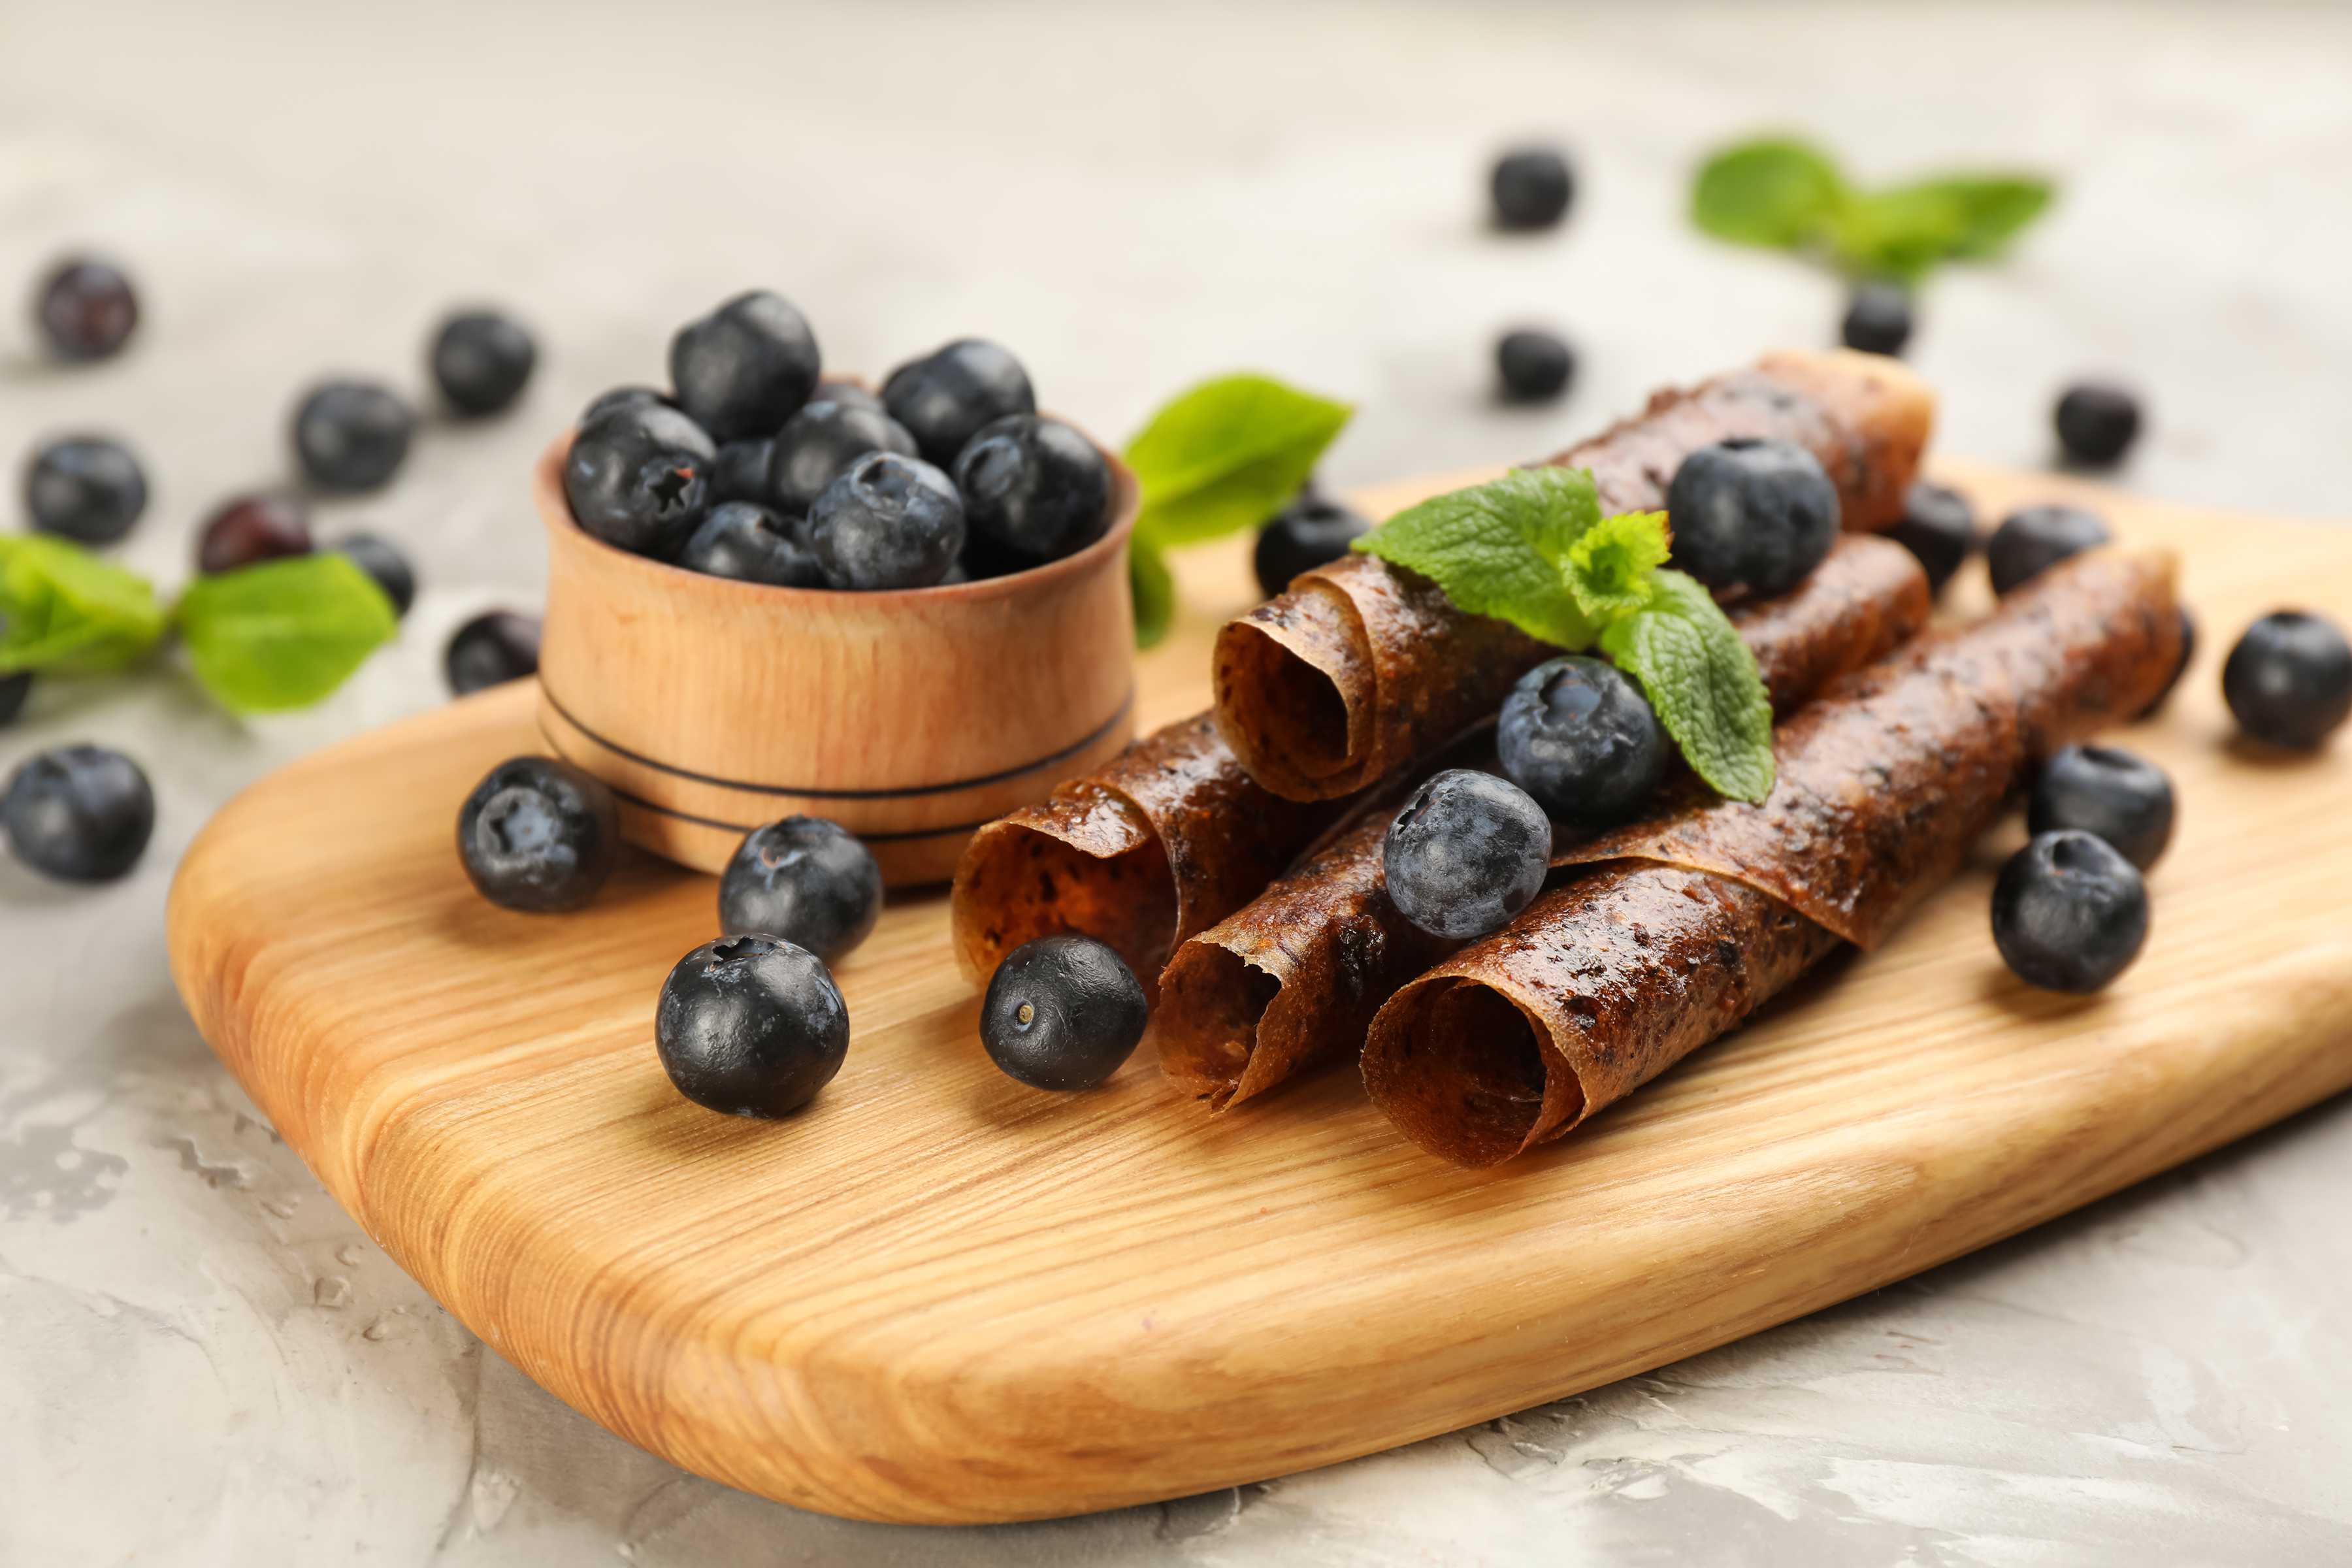 Rolls of blueberry fruit leather presented on a wooden serving board with fresh blueberries.